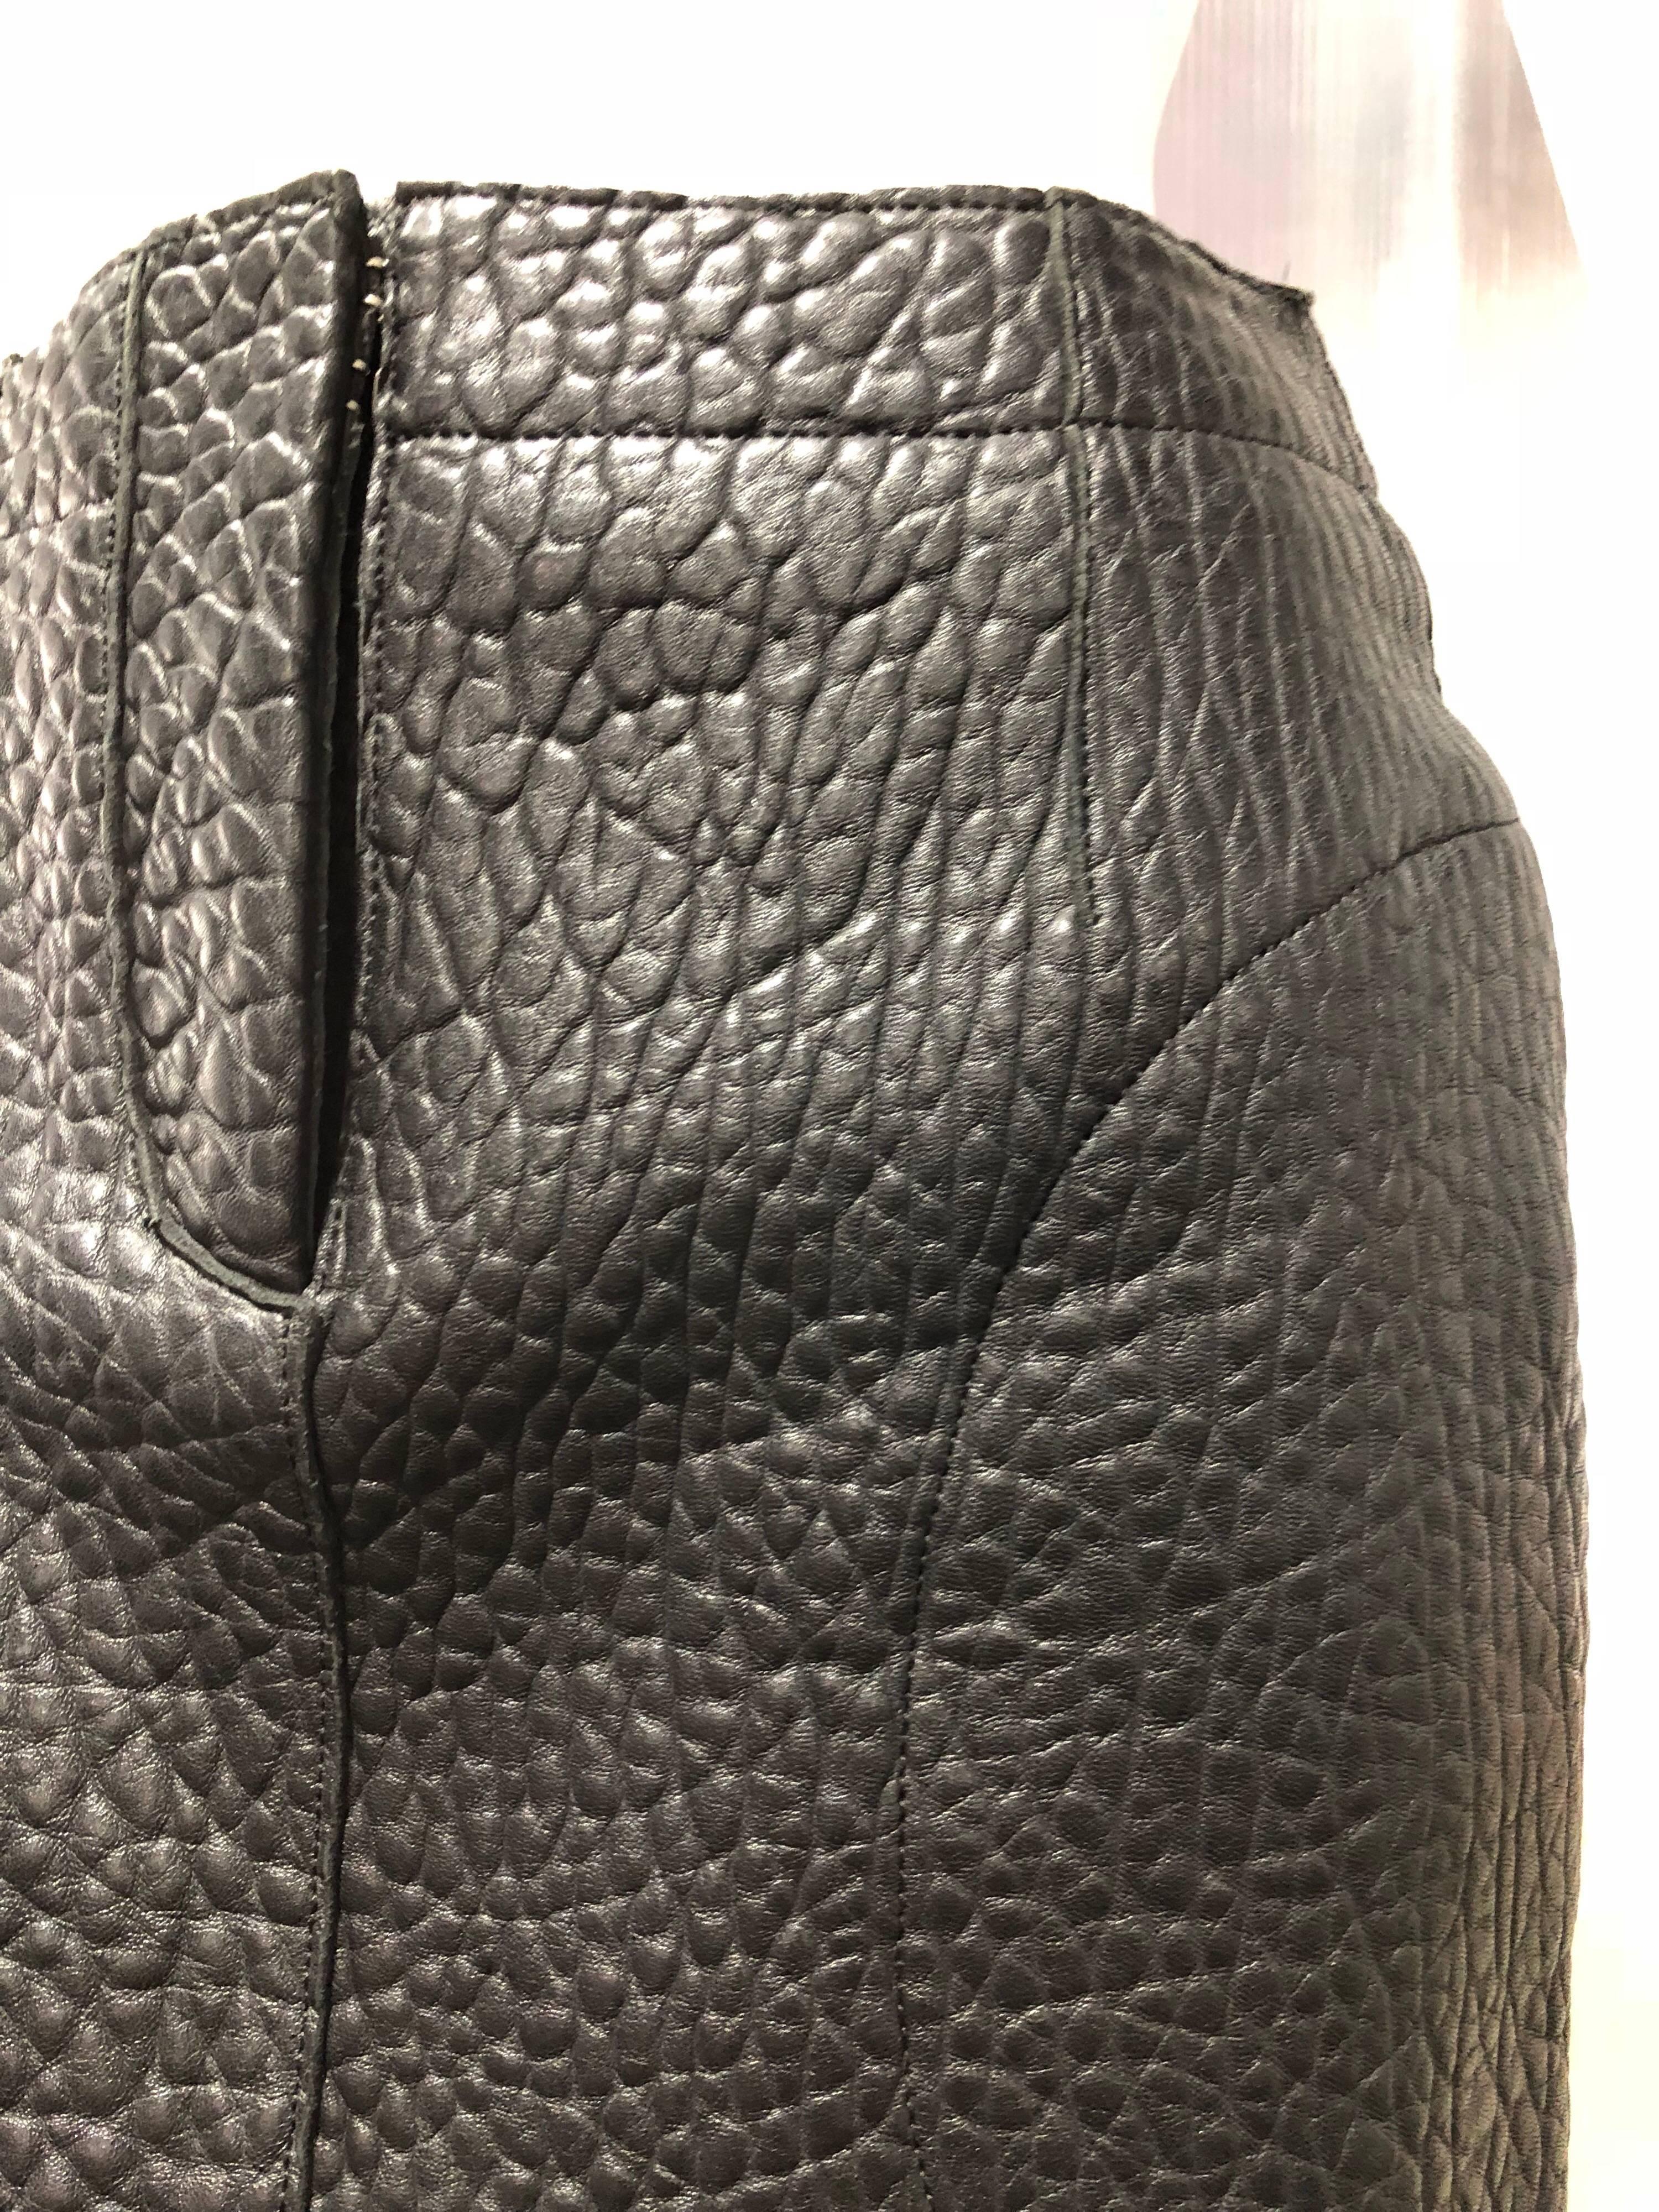 Carven embossed black leather skirt: Textured to resemble exotic skins. Front fly zipper. Deep side pockets and scooped and curved hemline. 
Channel your inner rockstar style vibe!
Fully lined.
Size 36.